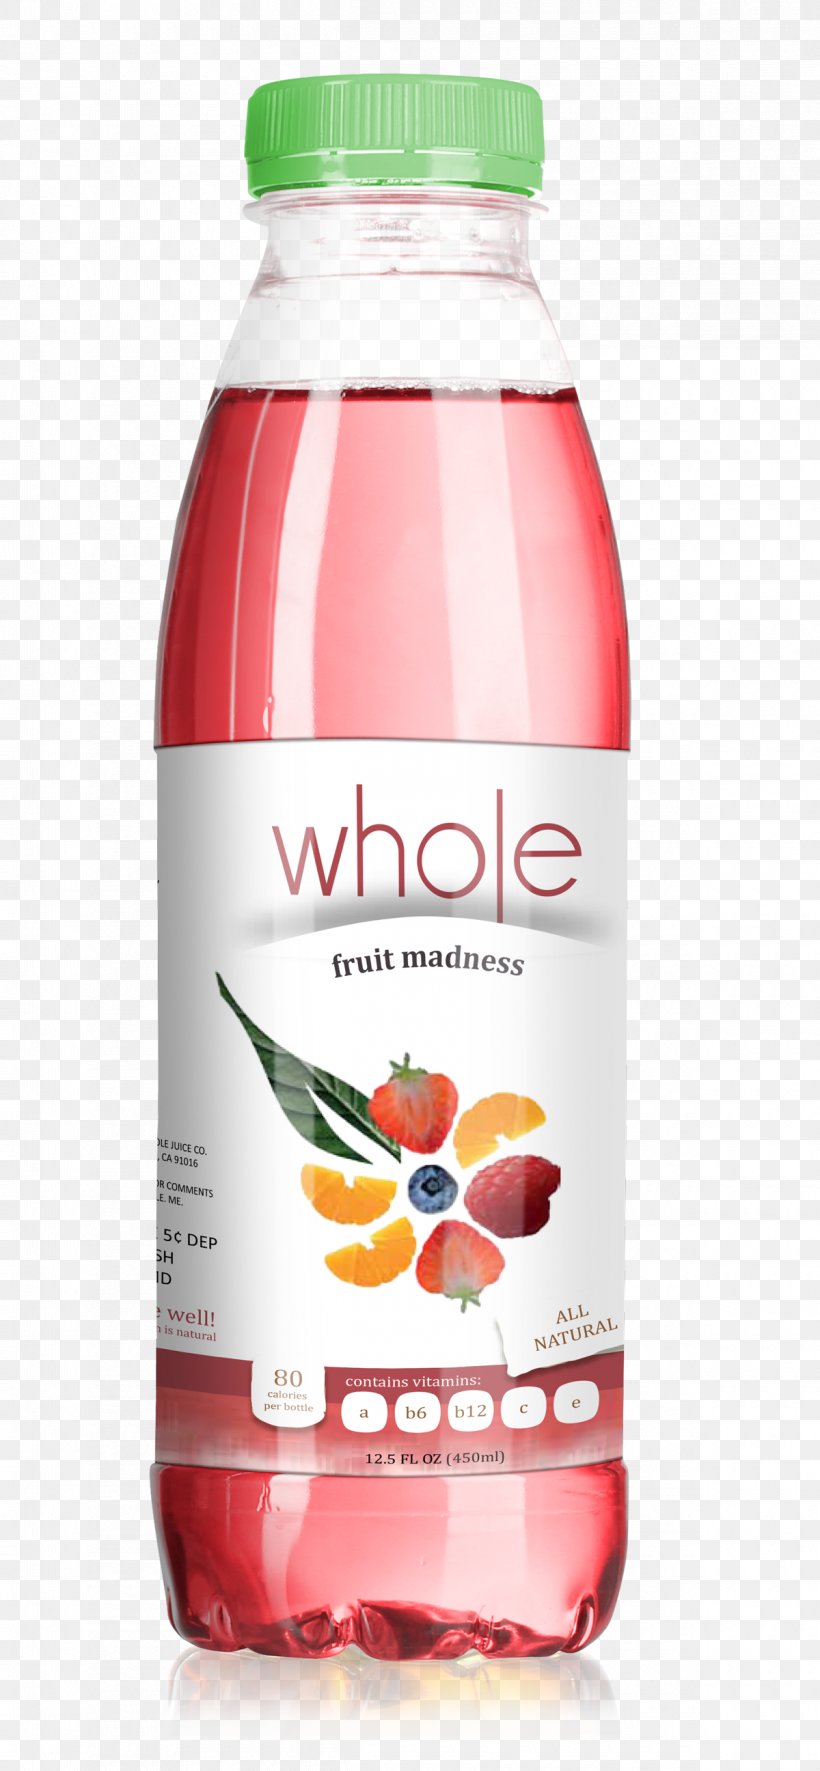 Pomegranate Juice Marketing Learning, PNG, 1200x2593px, Pomegranate Juice, Flavor, Fruit, Juice, Learning Download Free